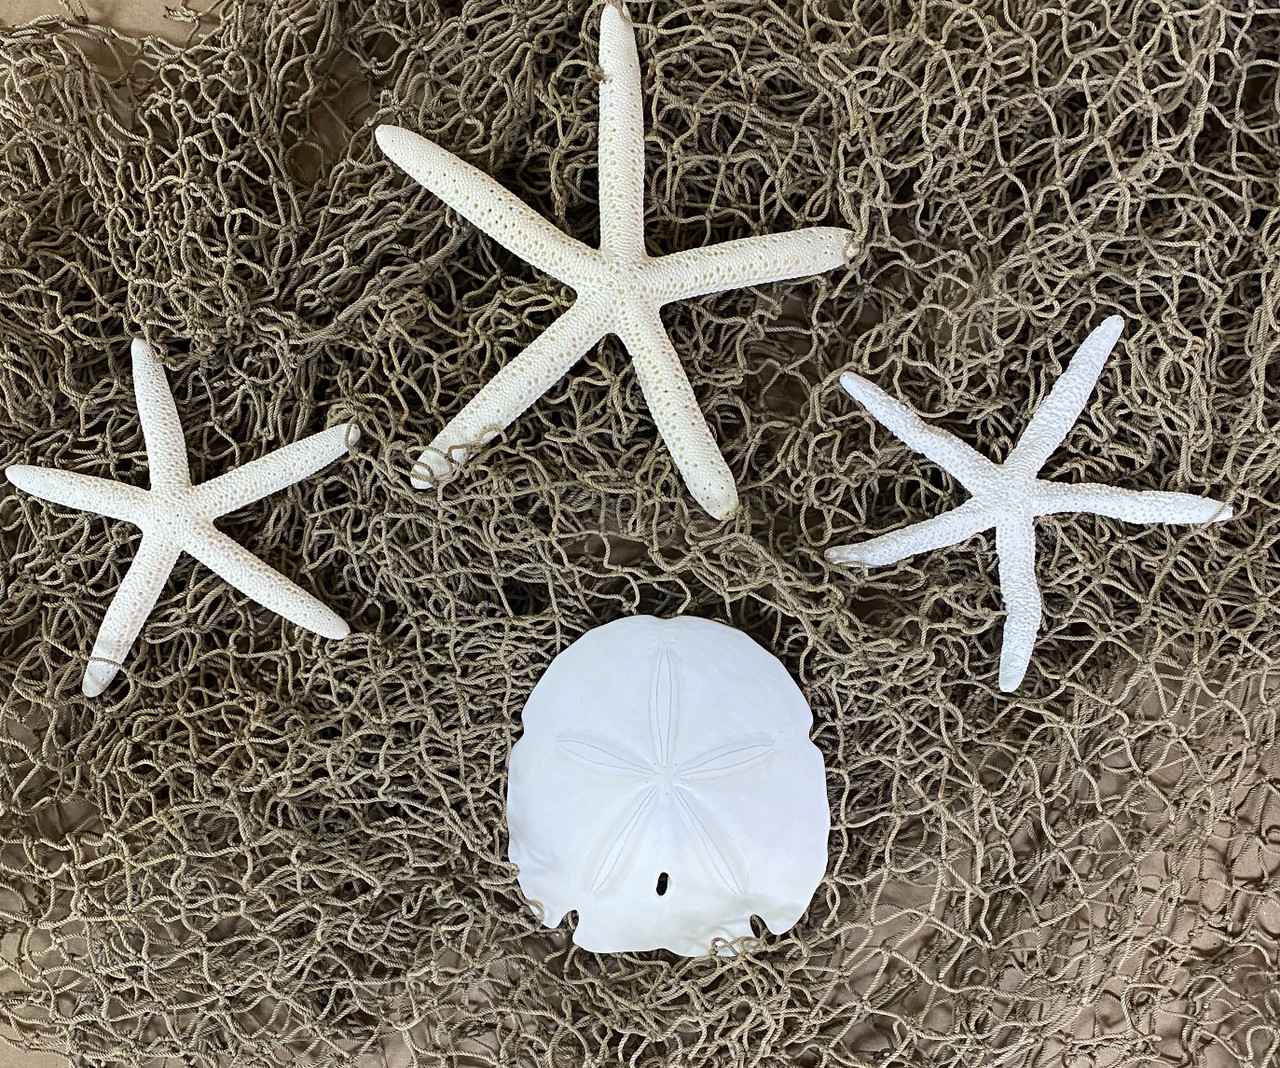 Tumbler Home Starfish and Sand Dollars (12pcs) - 6 Finger Starfish (4-6  in.) and 6 Sand Dollars (3-3.5 in.) - Starfish and Sand Dollars for Crafts